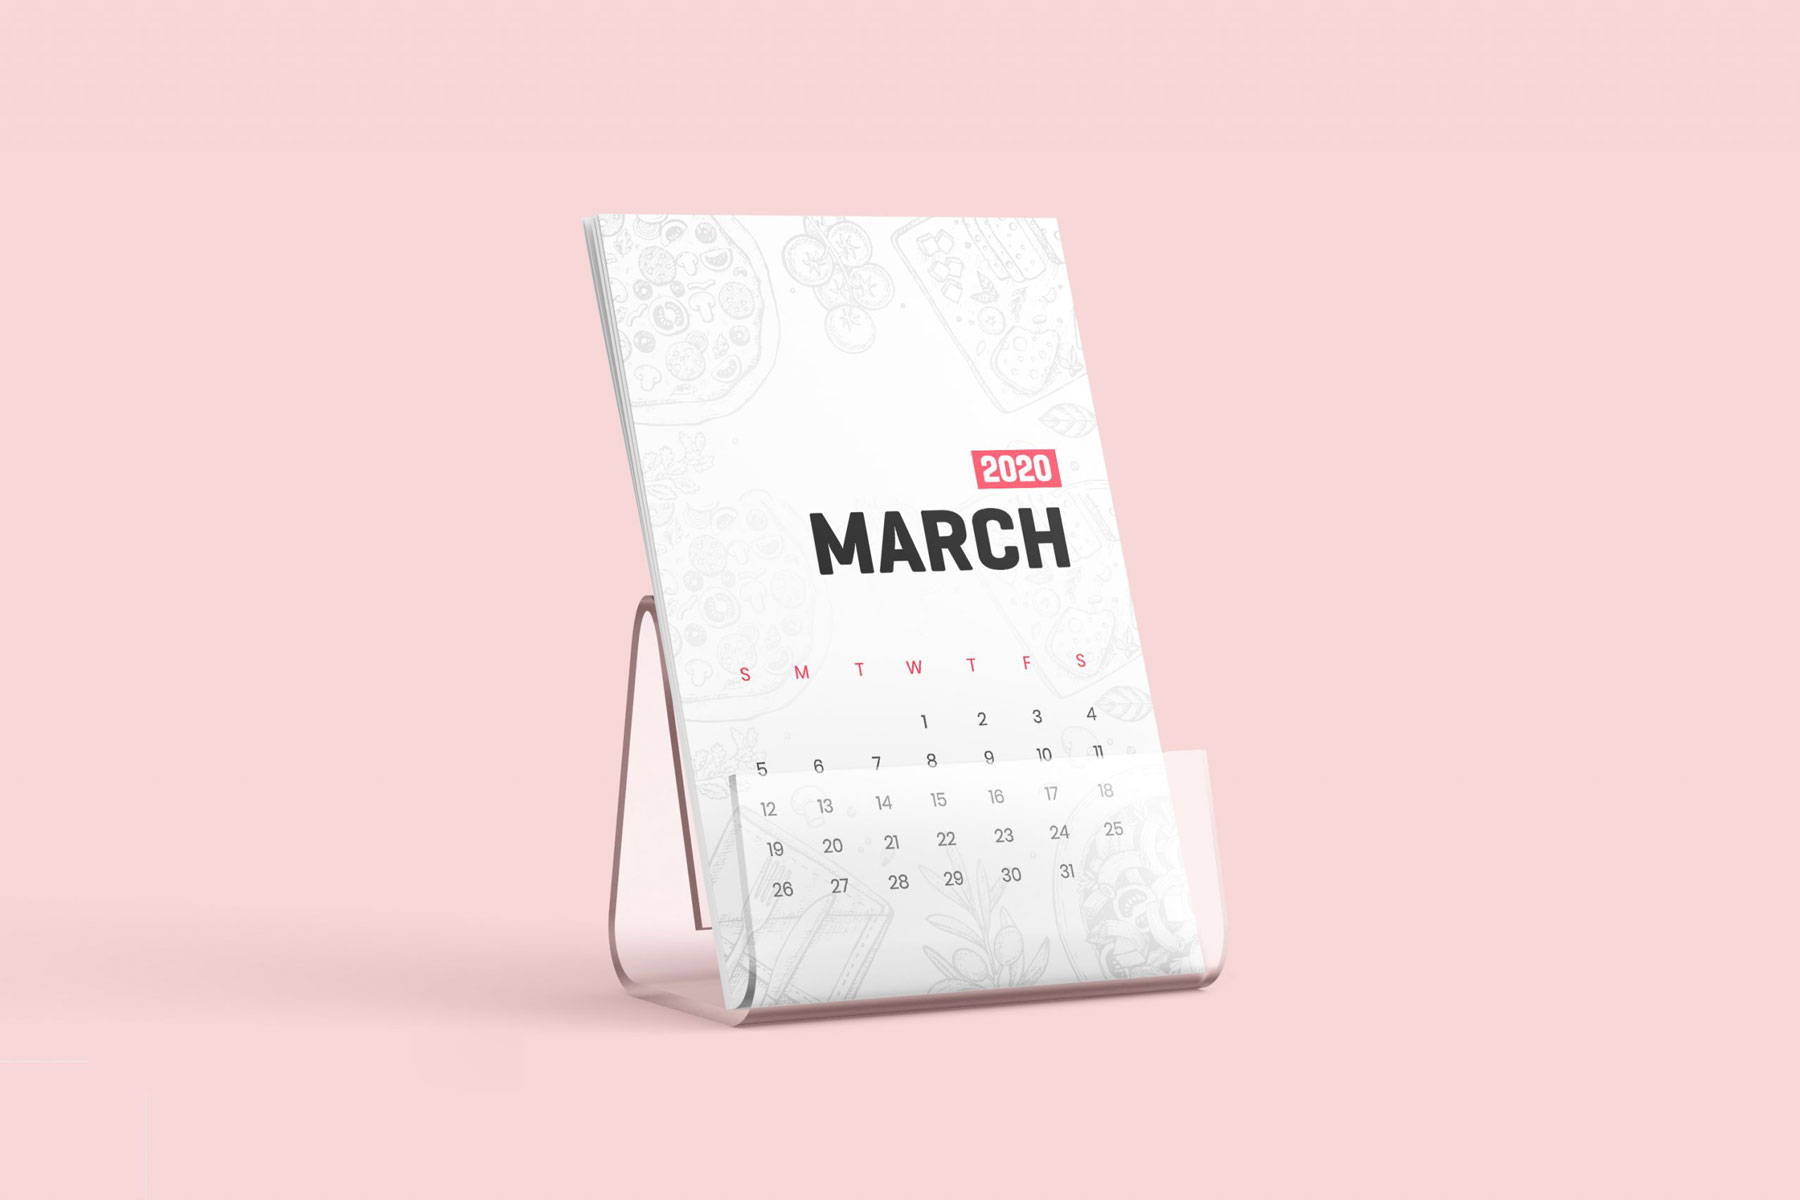 Free Desk Calendar / Flyer with Acrylic Stand Mockup PsFiles